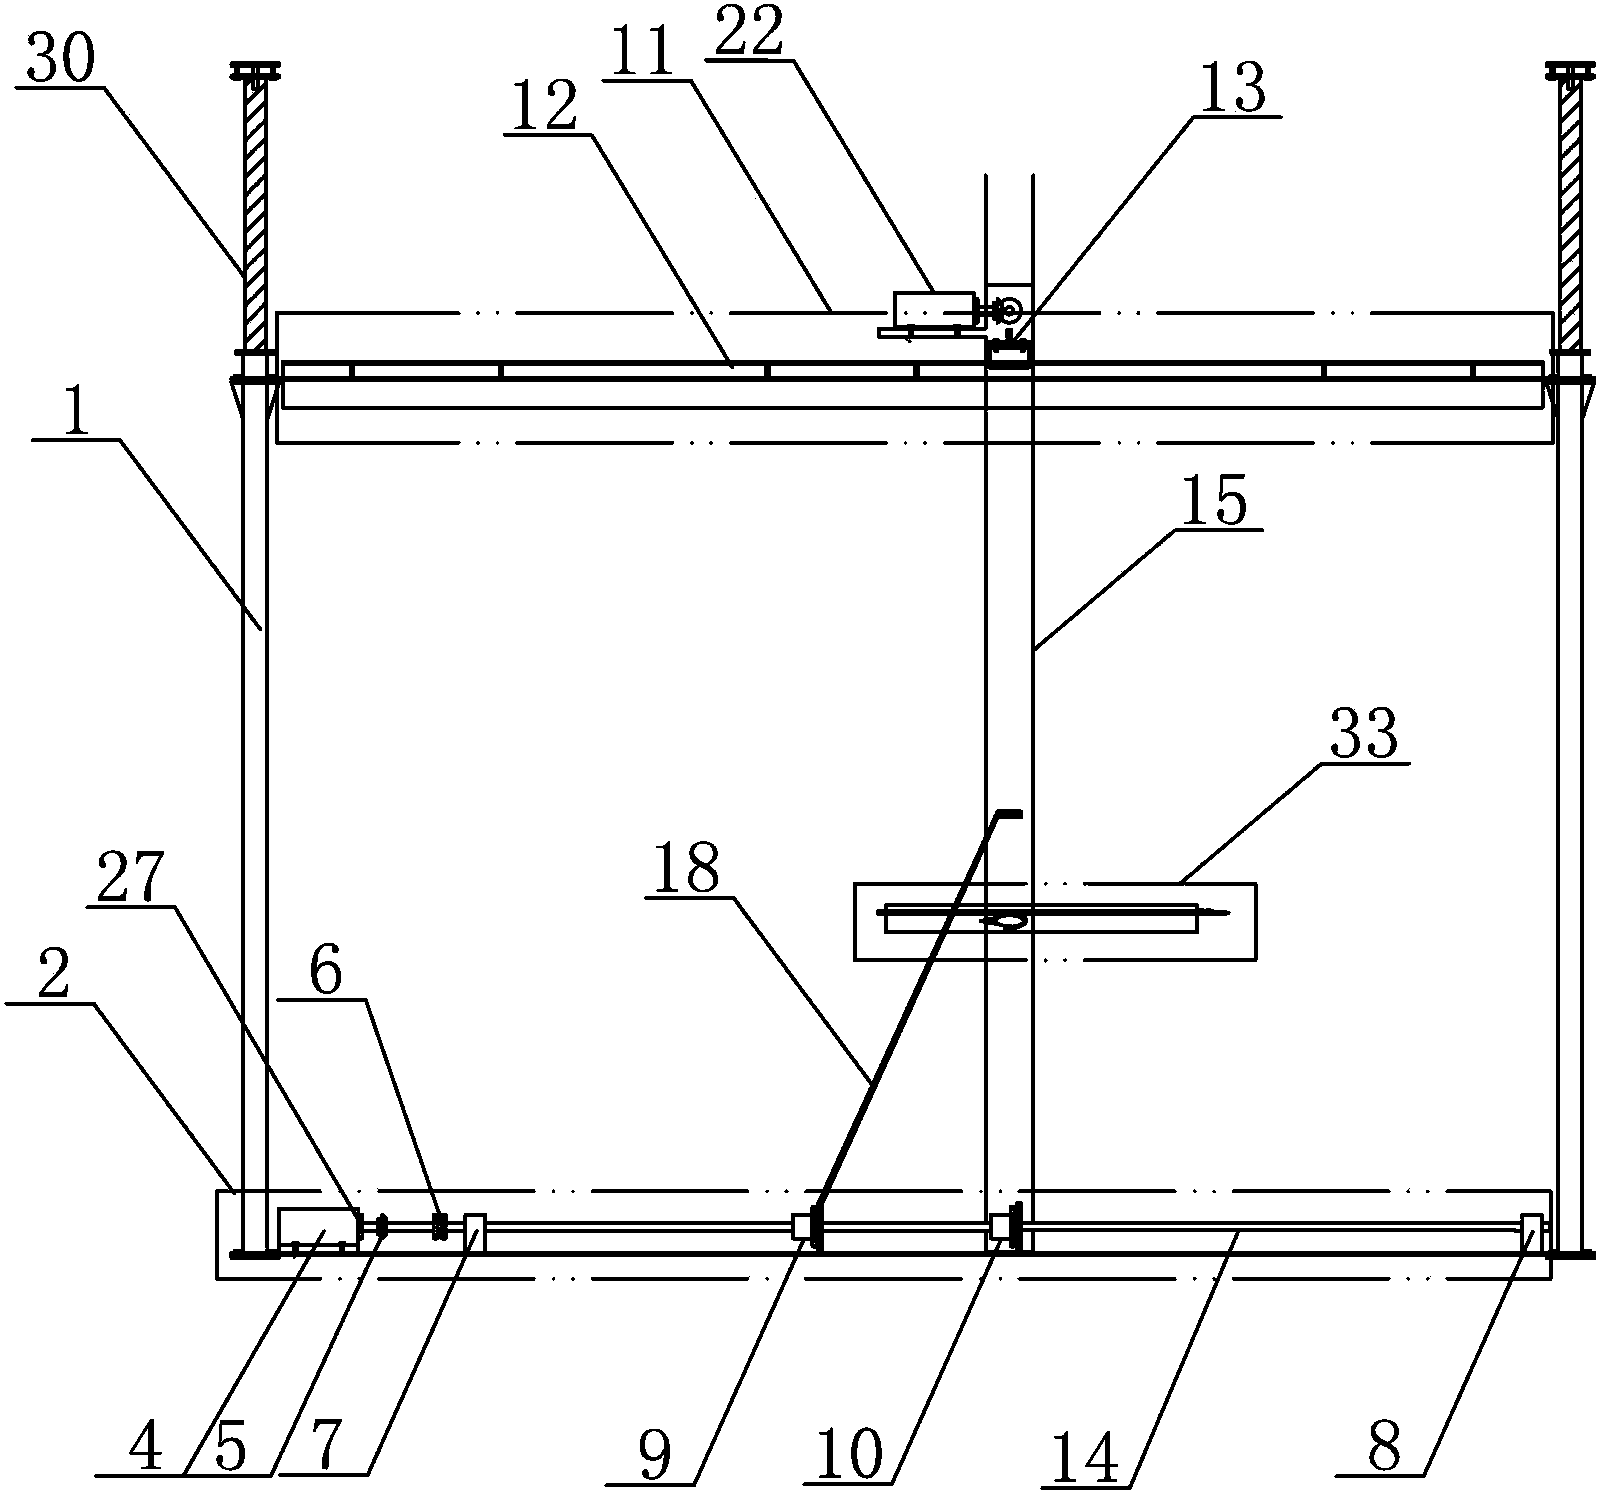 A quasi-3D automatic measurement system for atmospheric boundary layer wind tunnel